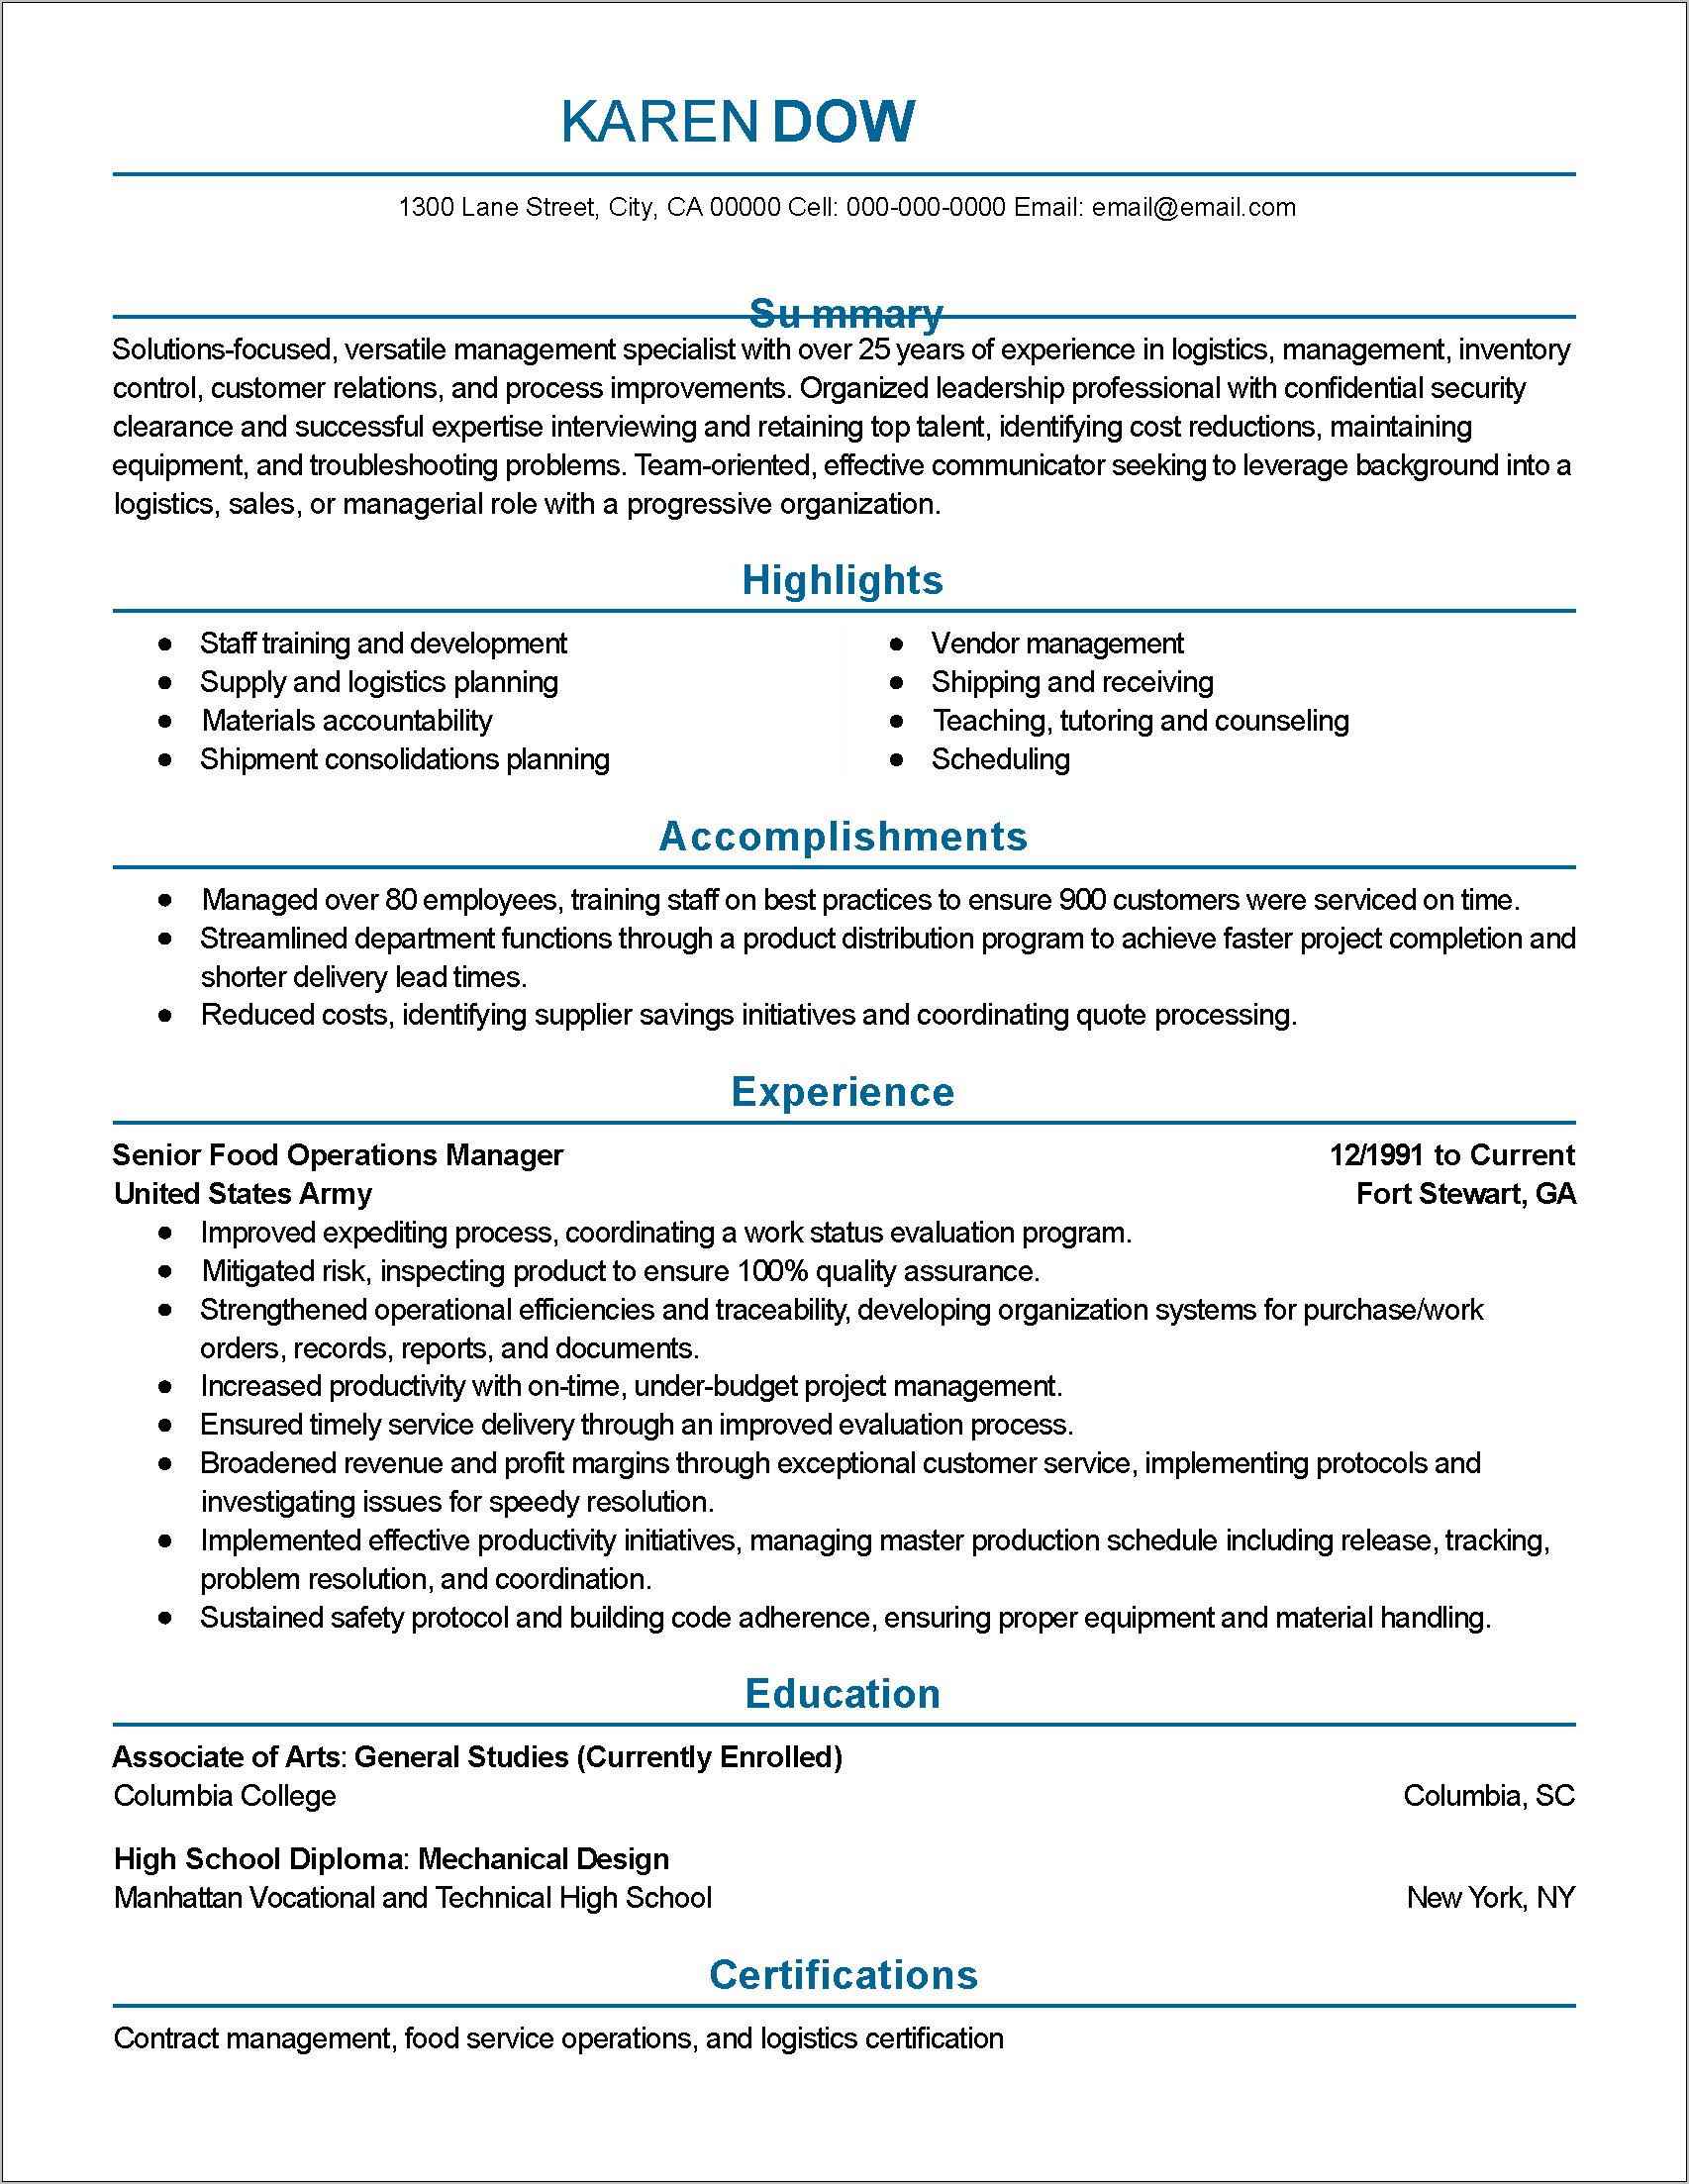 Resume Templates For Electrical Engineers